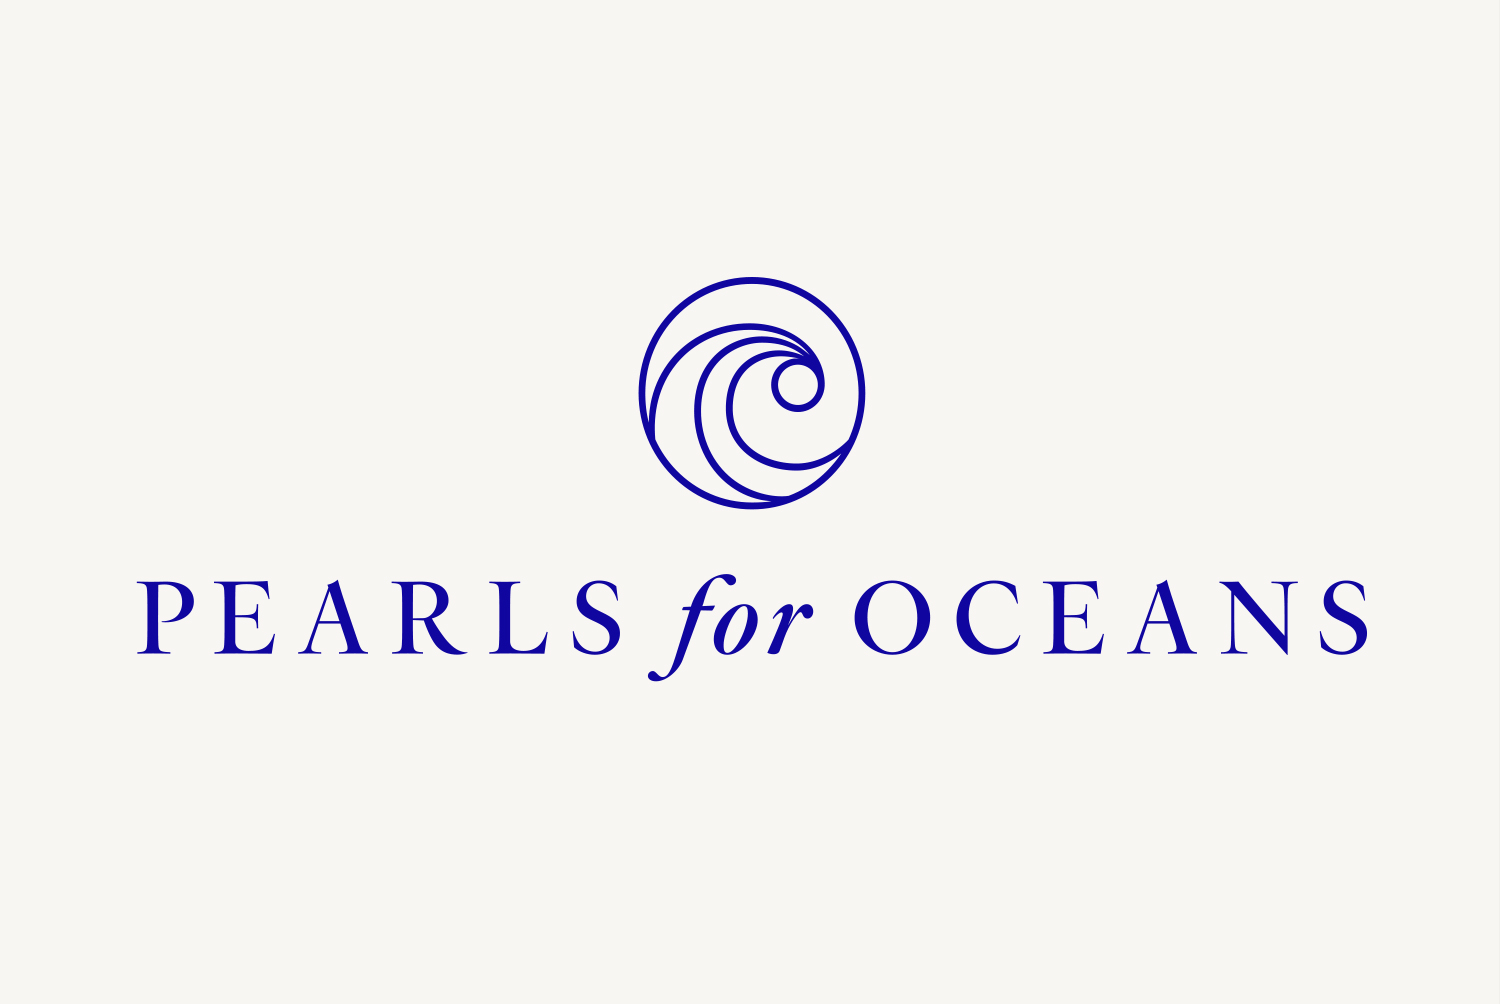 pearls for oceans